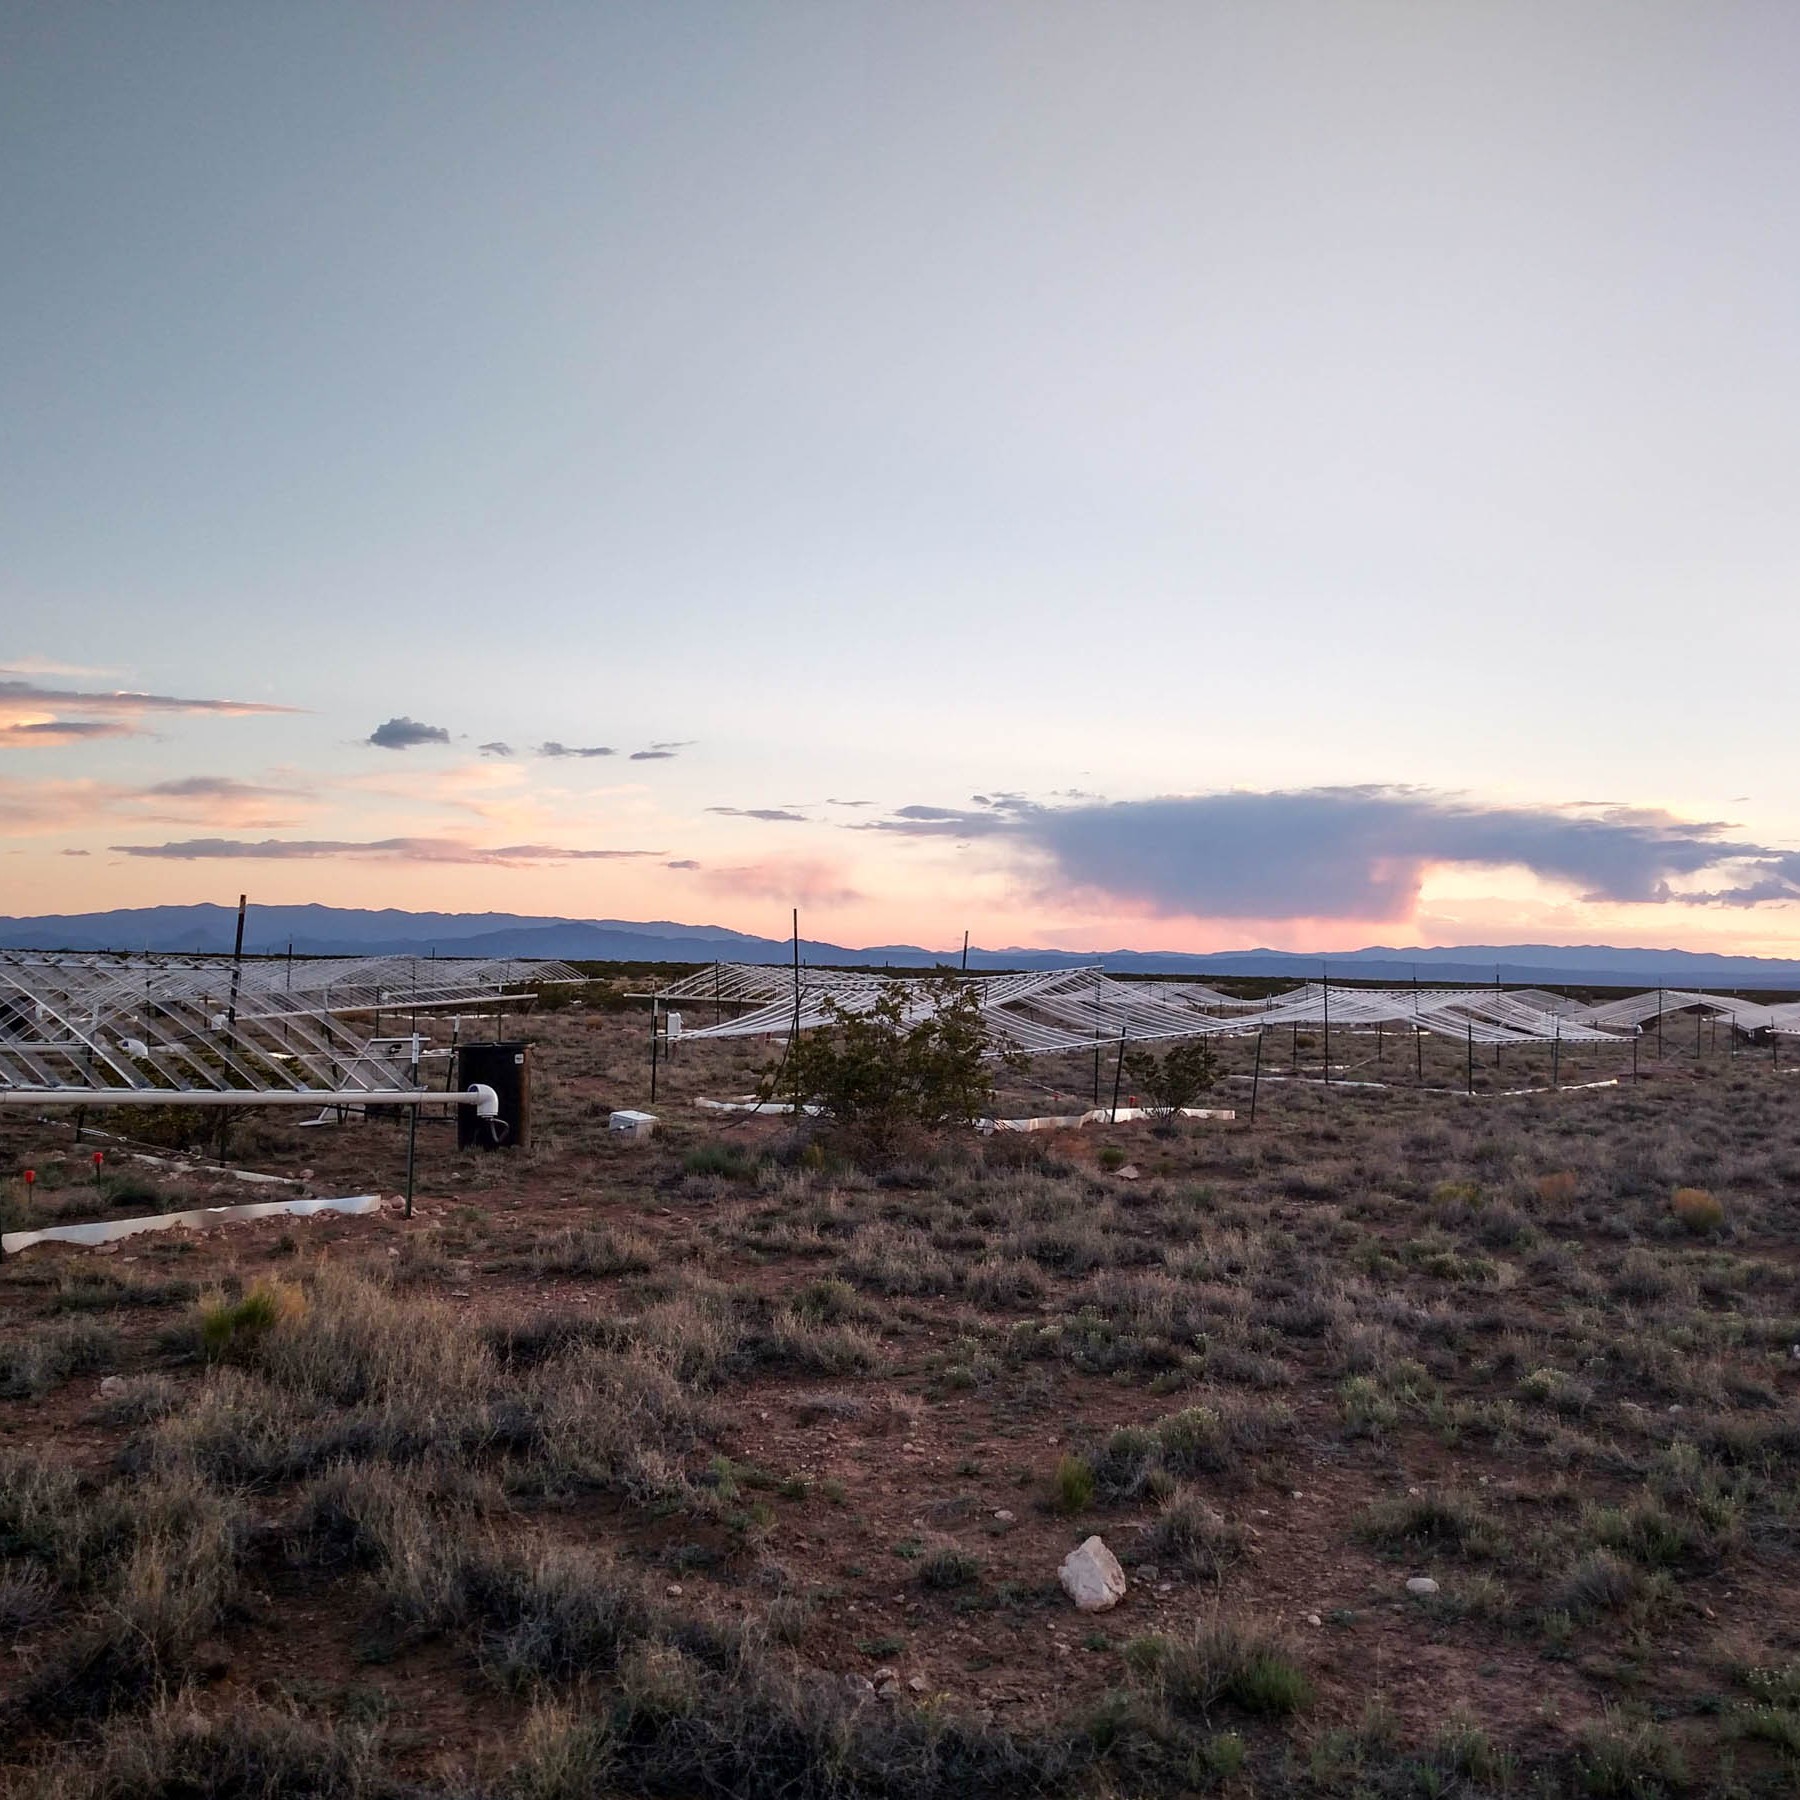 Distant summer storm clouds gather during sunset near a mean-variance experiment site.